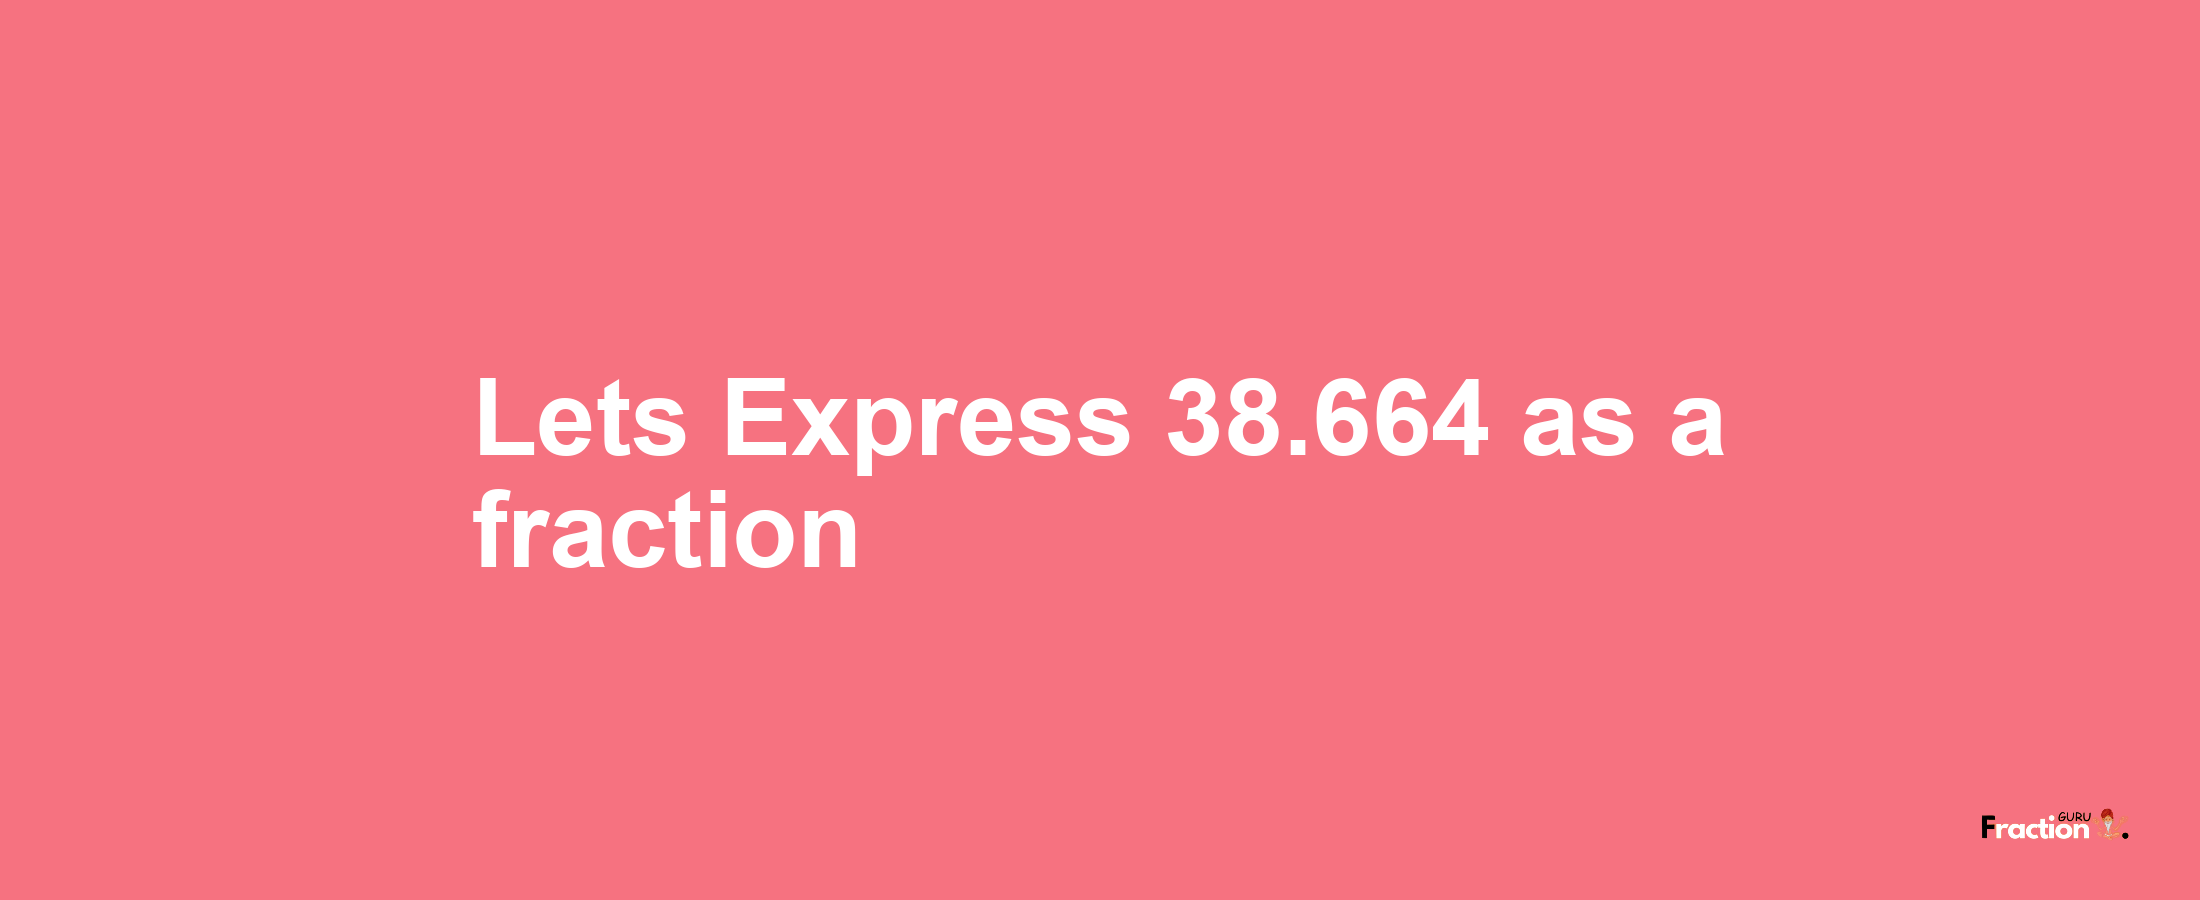 Lets Express 38.664 as afraction